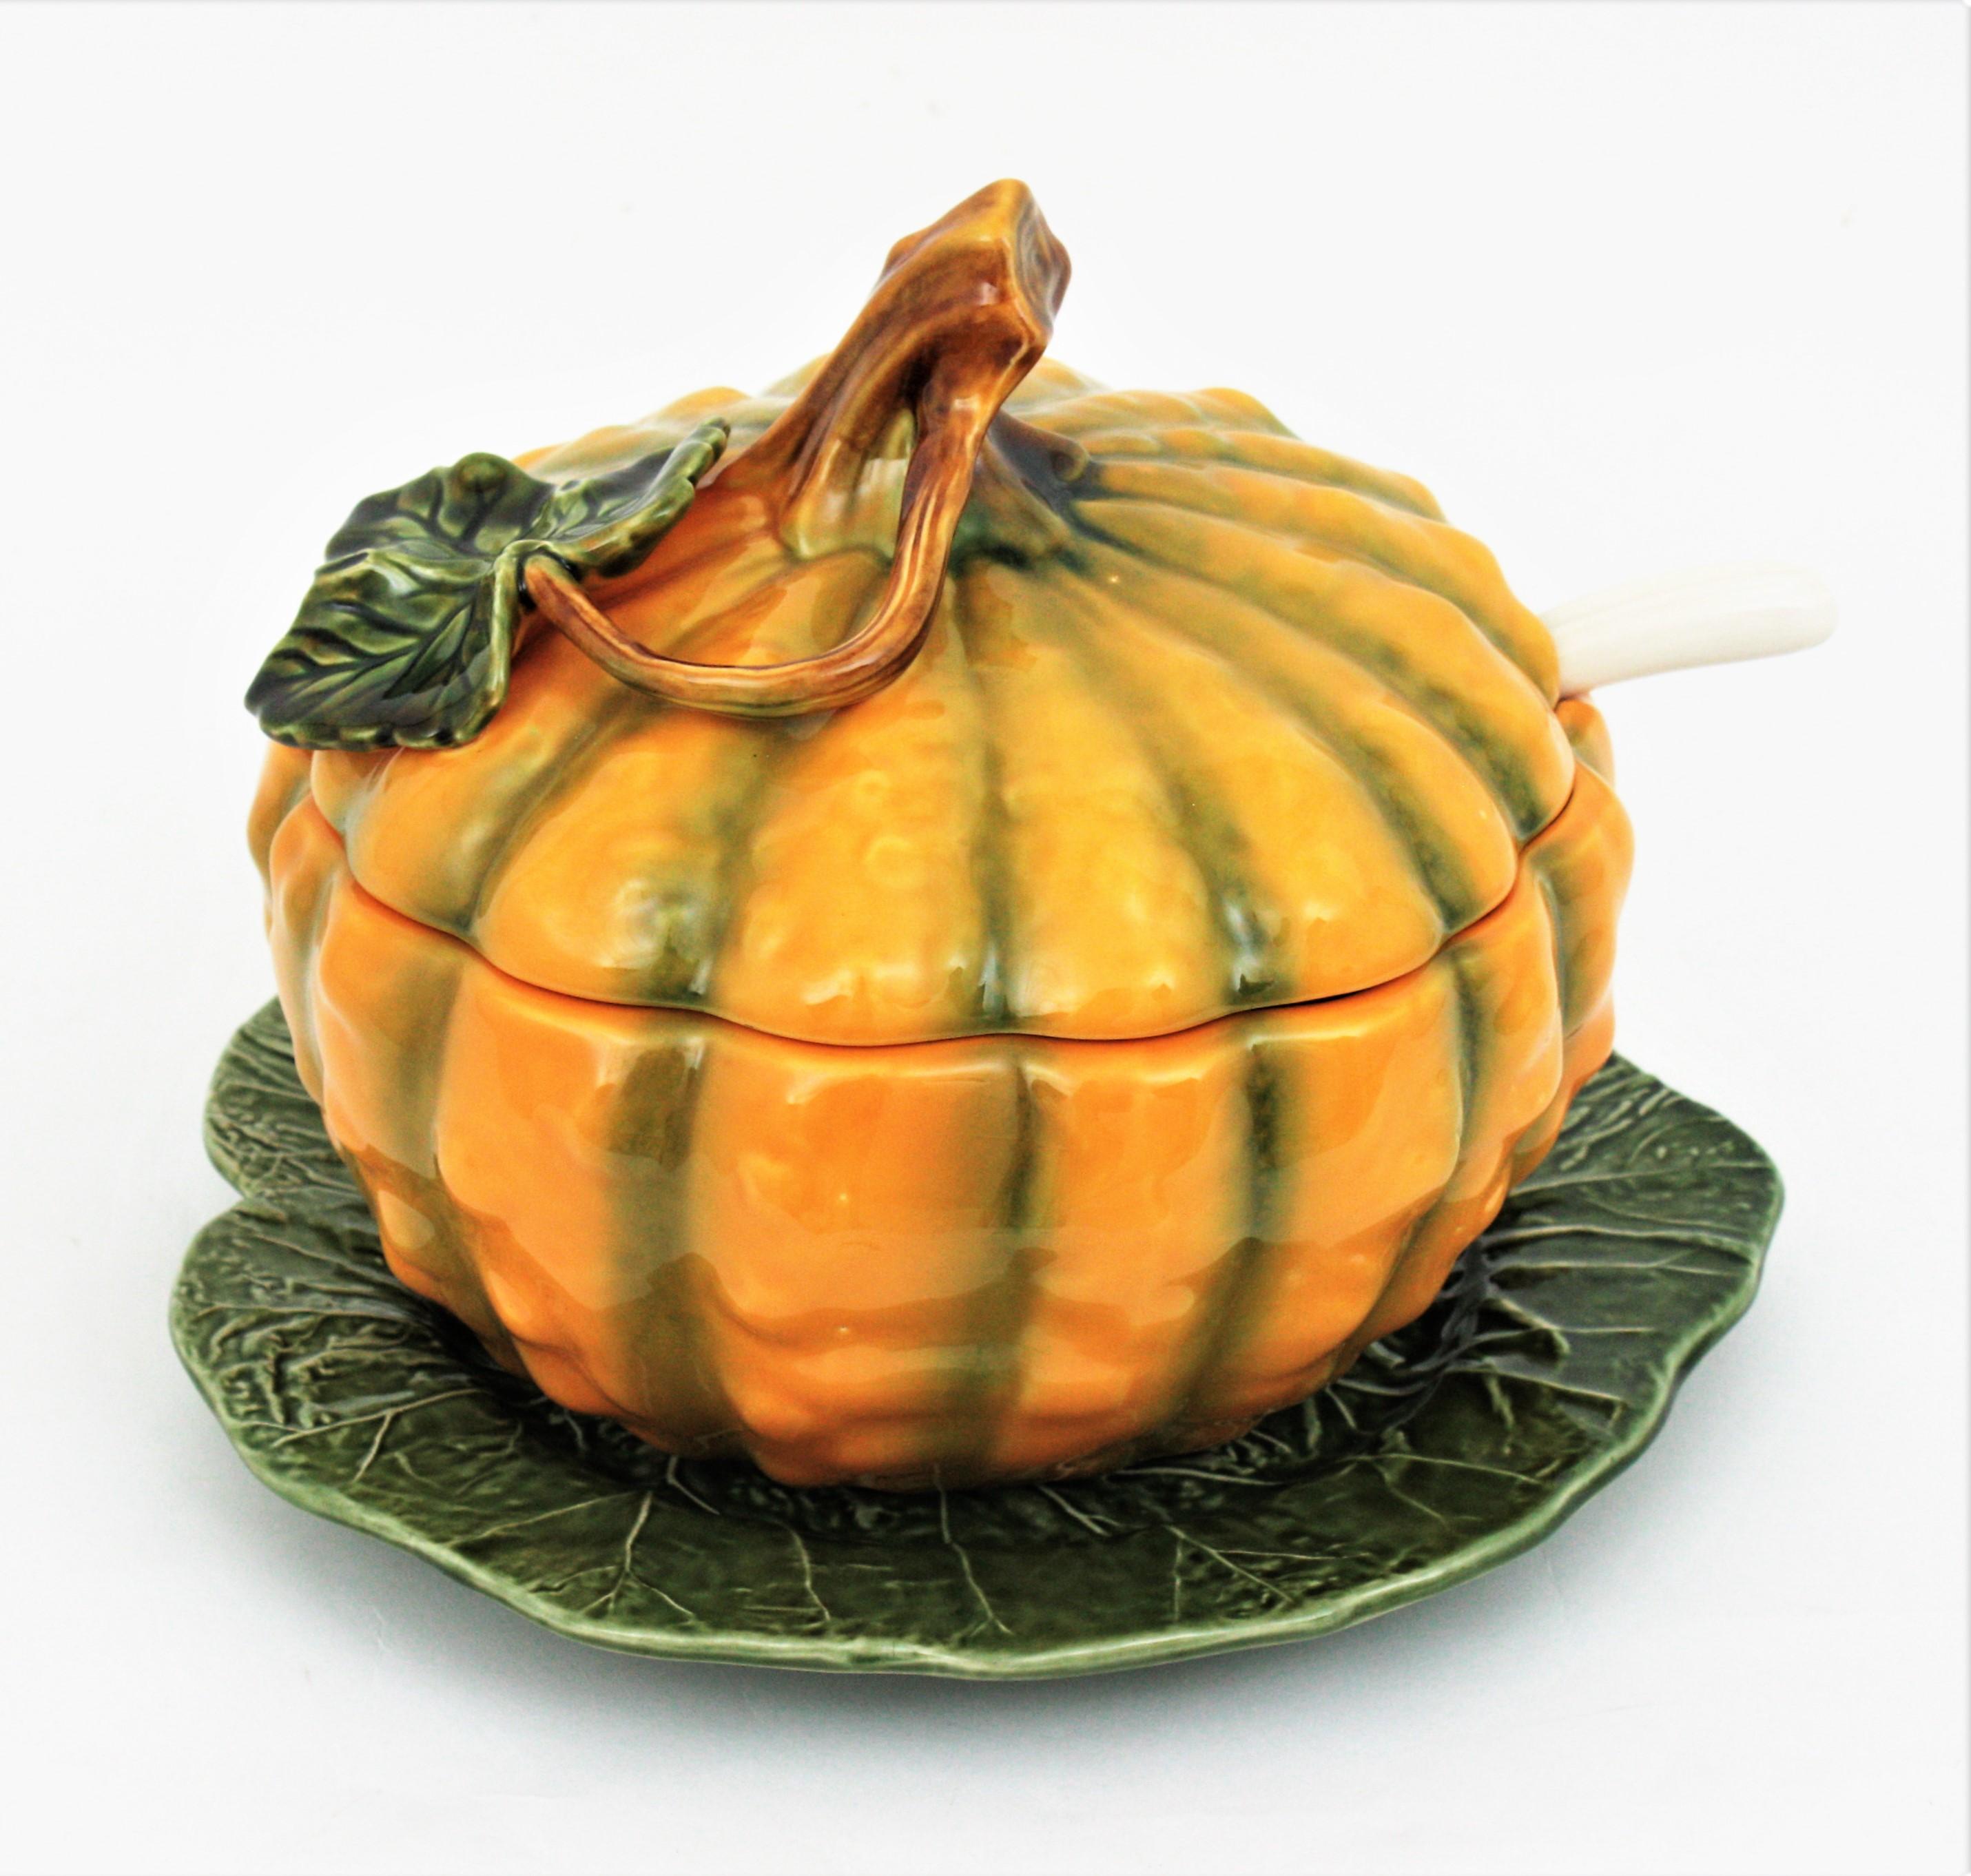 Eye-catching Portuguese pumpkin glazed ceramic large soup tureen with platter and ladle, circa 1960s
The set is comprised by a hand painted Majolica ceramic pumpkin large tureen, a leaf shaped serving plate and a ladle spoon.
This colorful and